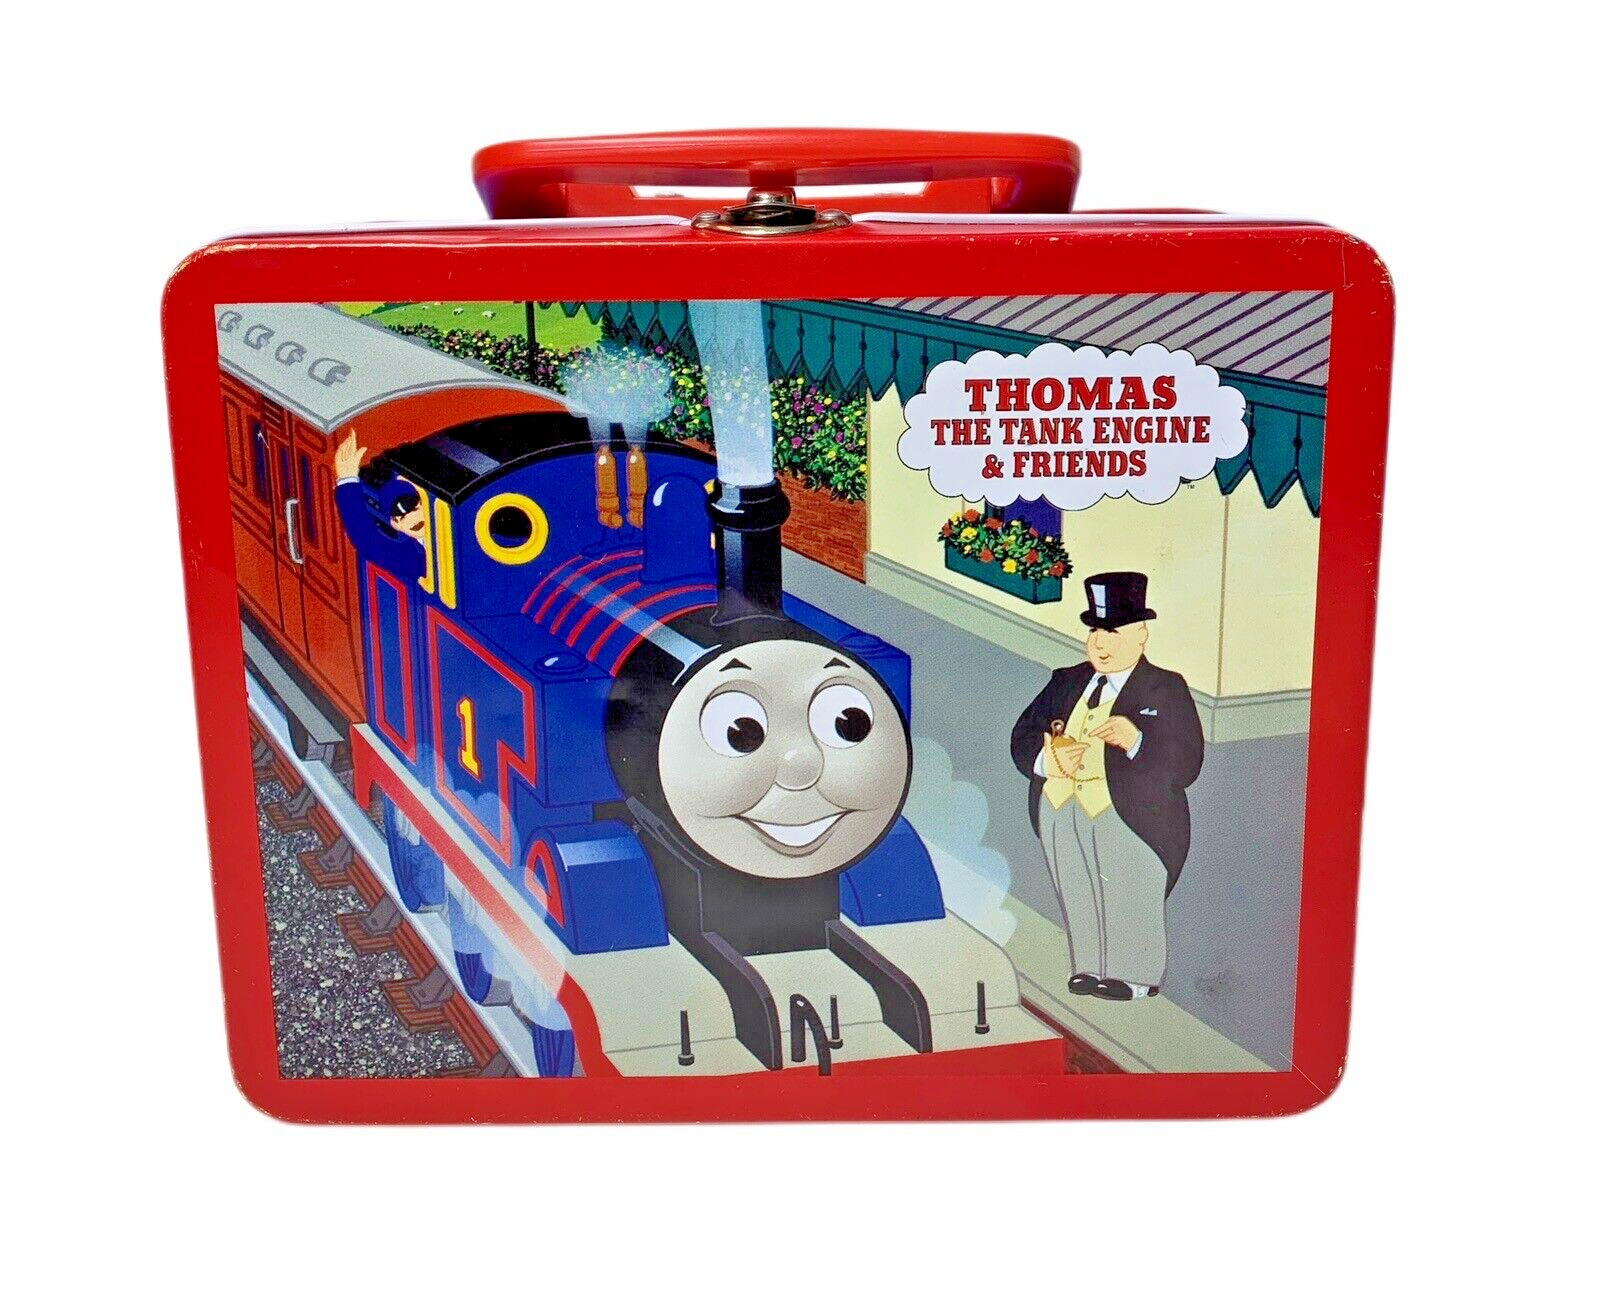 Vintage Thomas the Tank Engine Metal Tin Lunch Box 1997 Schylling Train Friends